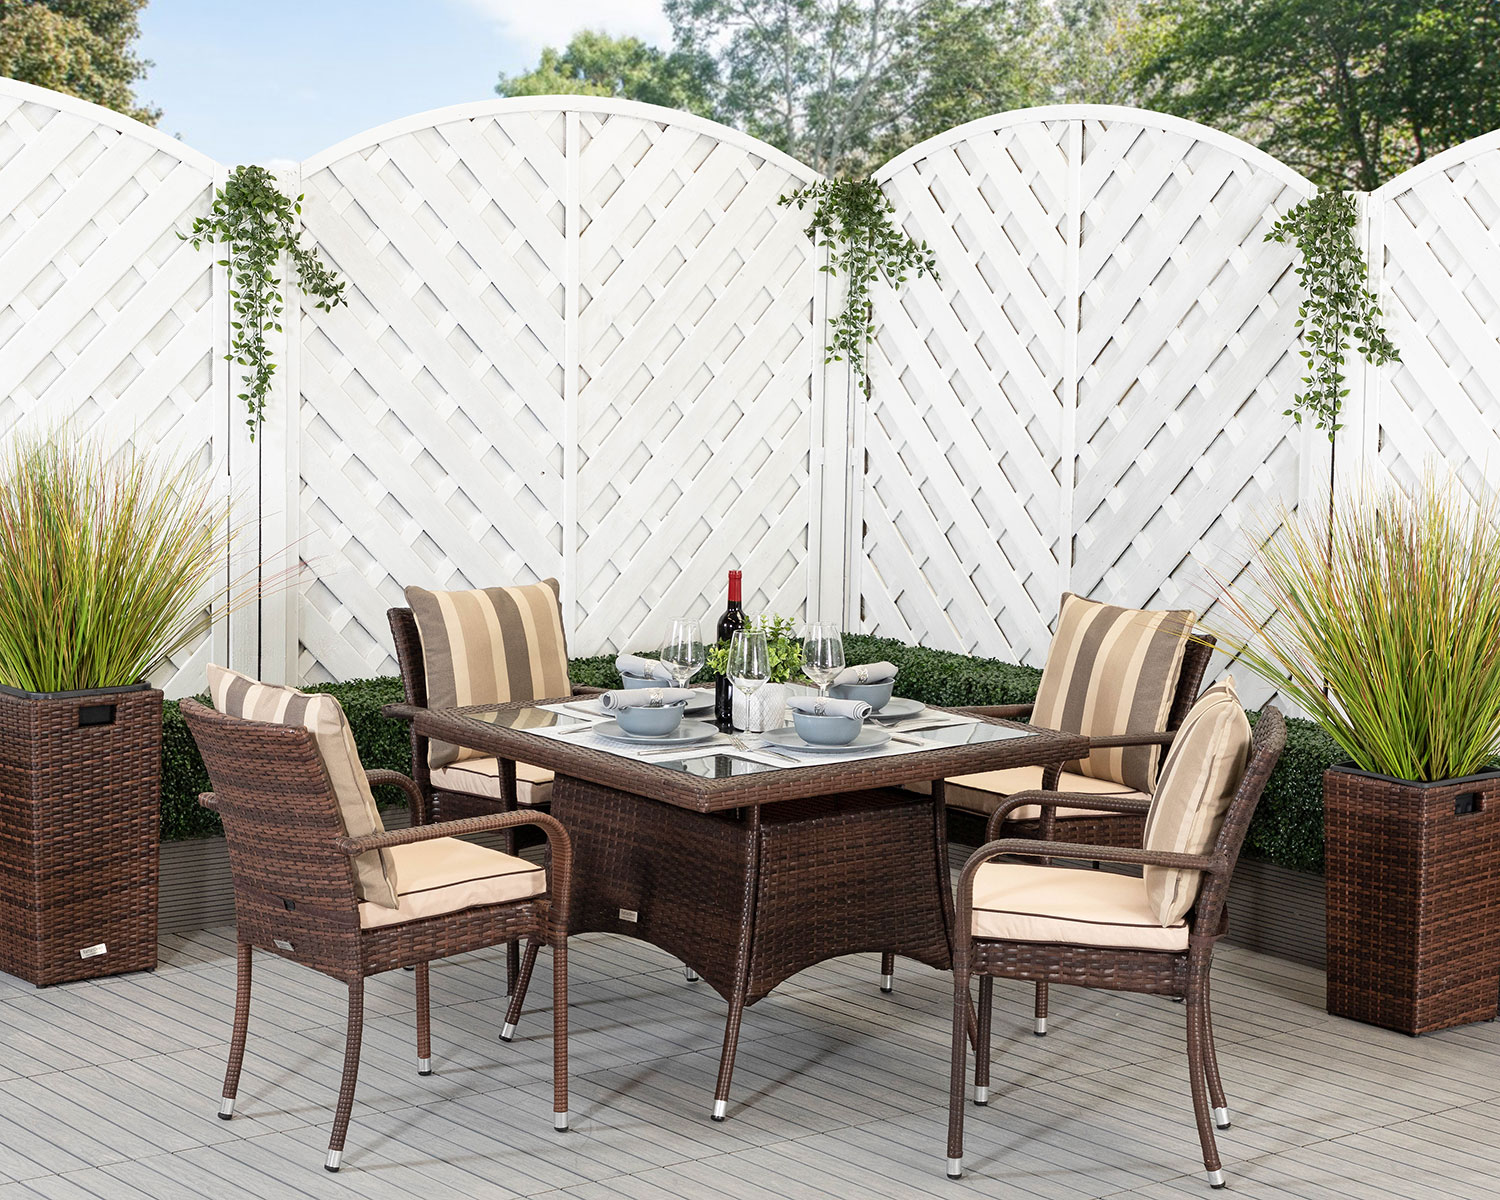 4 Seat Rattan Garden Dining Set With Square Dining Table In Brown Roma Rattan Direct